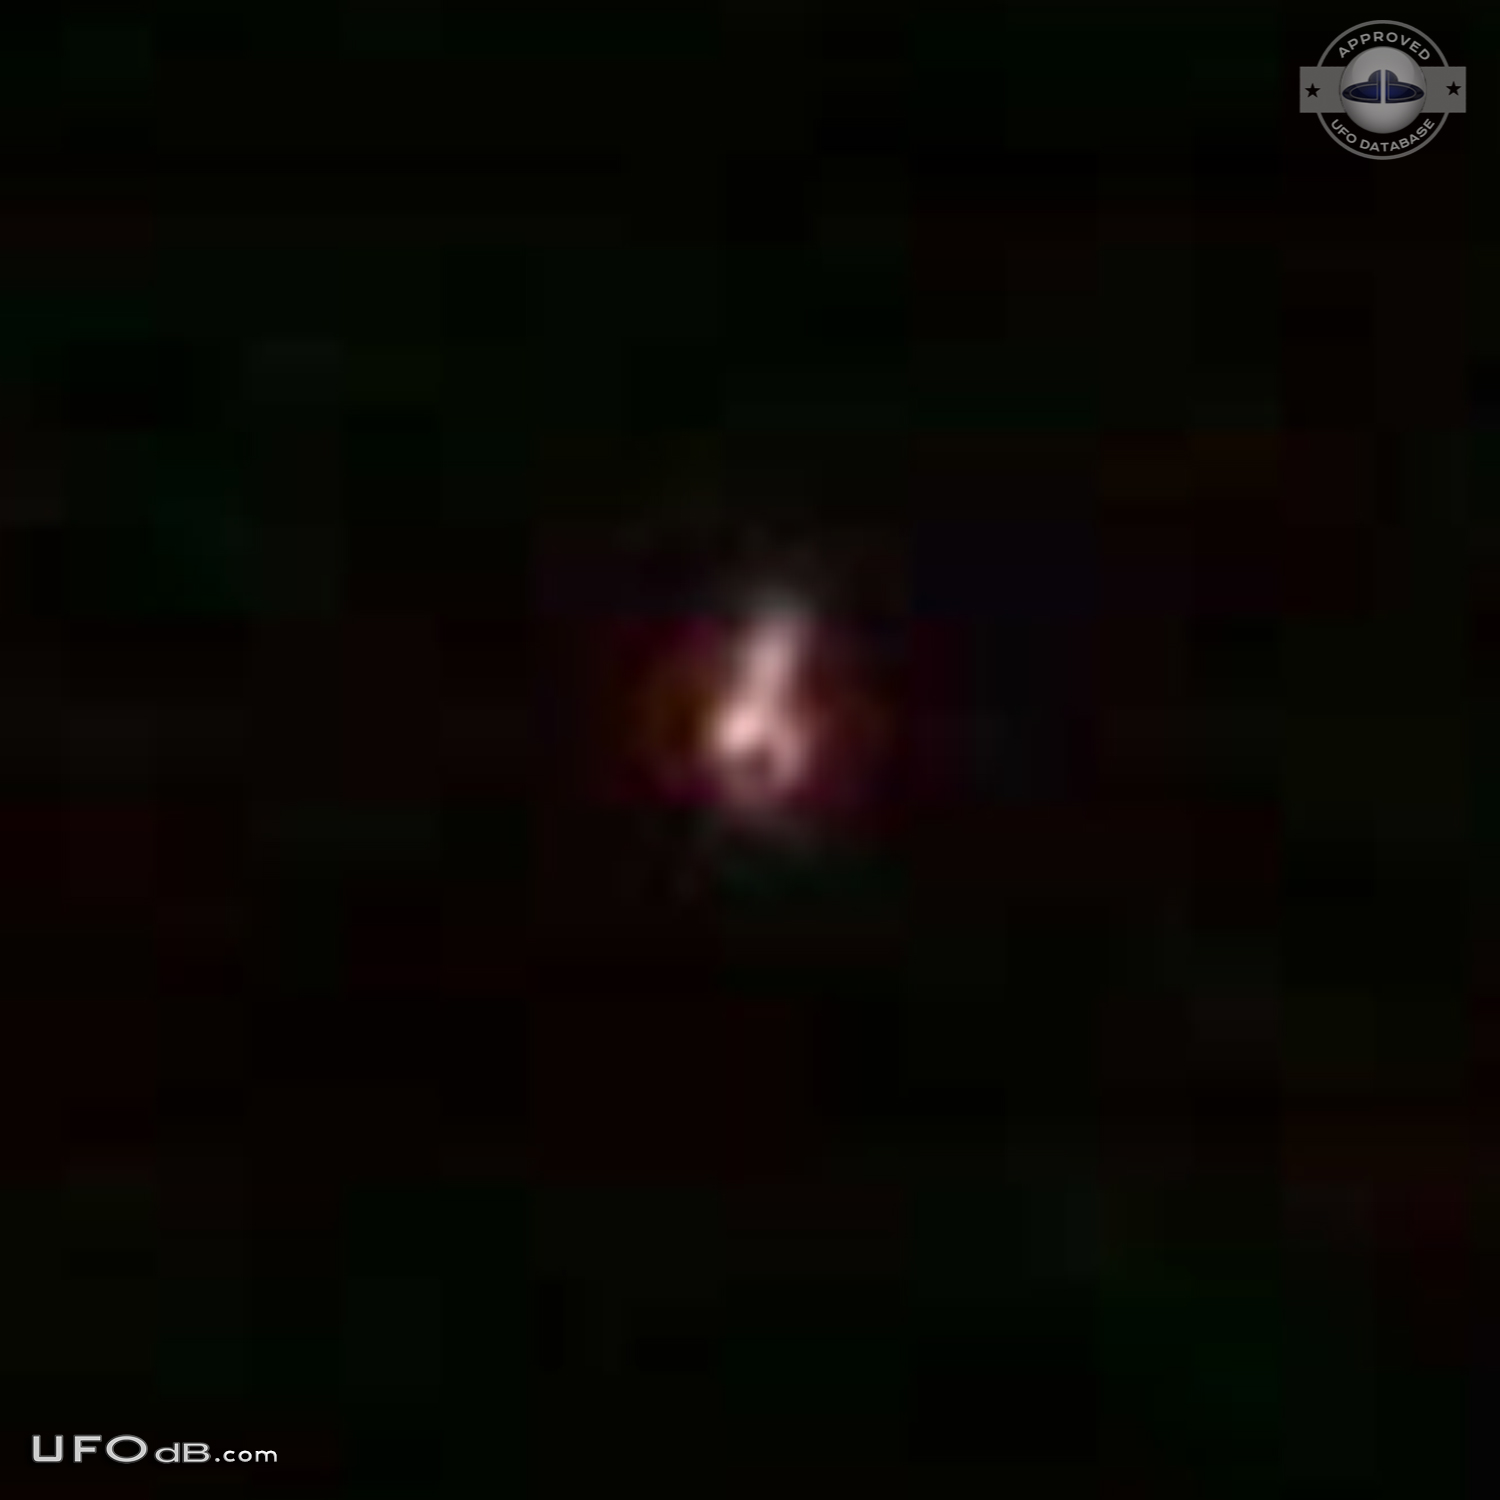 Huge red ball UFO seen by a group of people in West Allis, Wisconsin UFO Picture #375-4